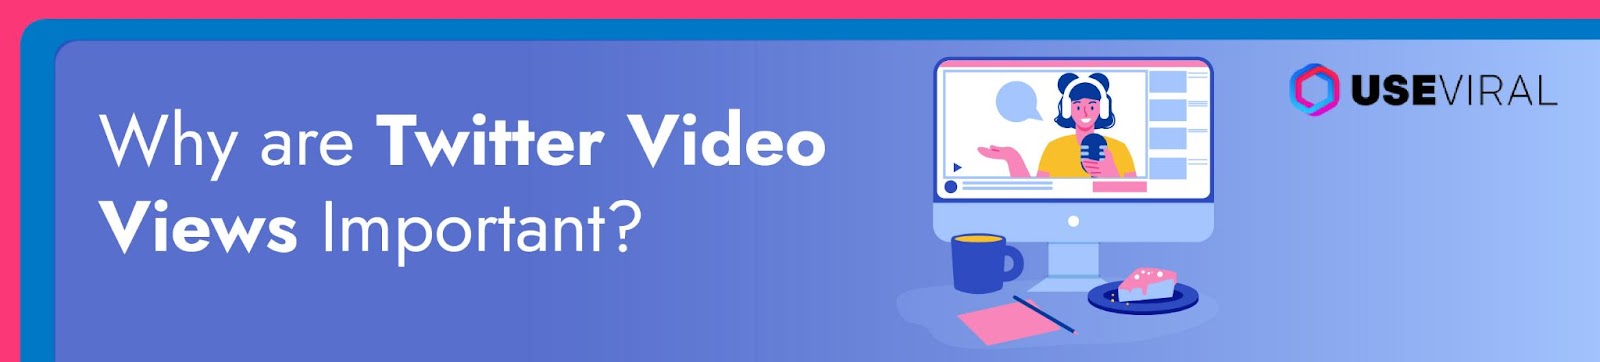 Why are Twitter Video Views Important?